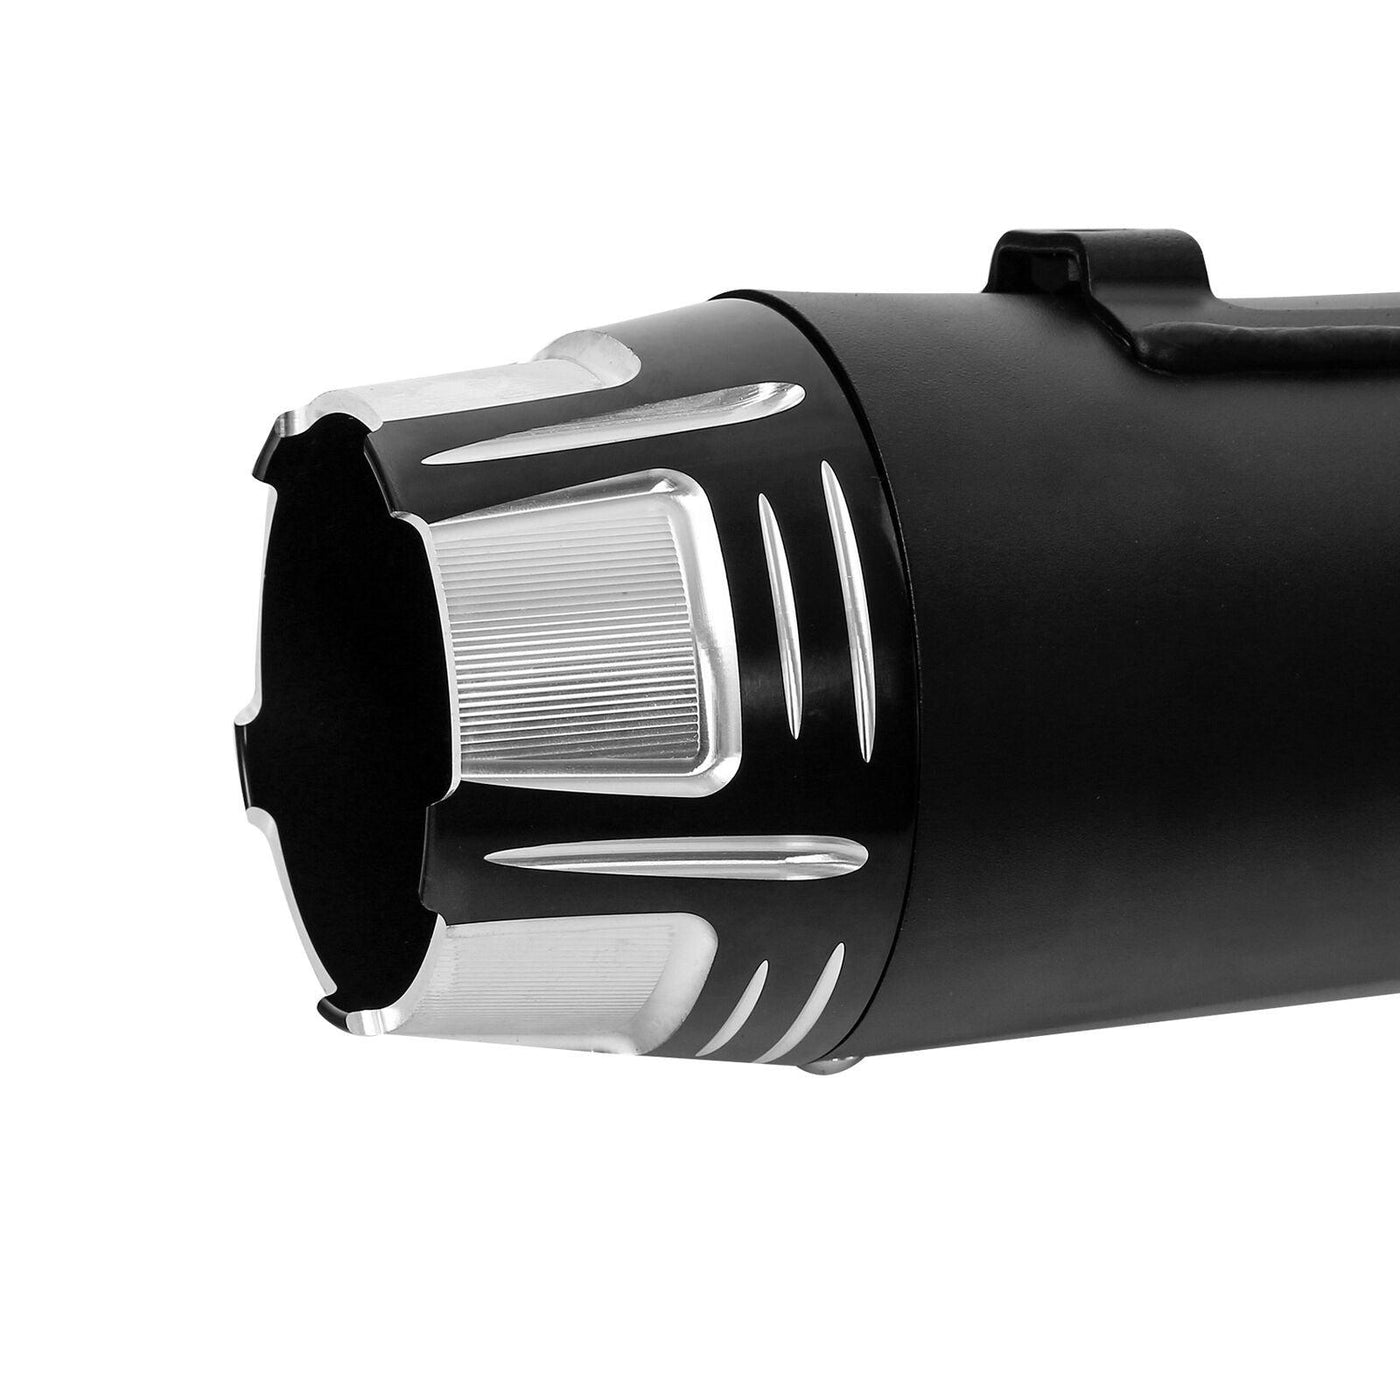 Black Dual Exhaust Mufflers Fit For Harley Touring Road Electra Glide 2017-2020 - Moto Life Products